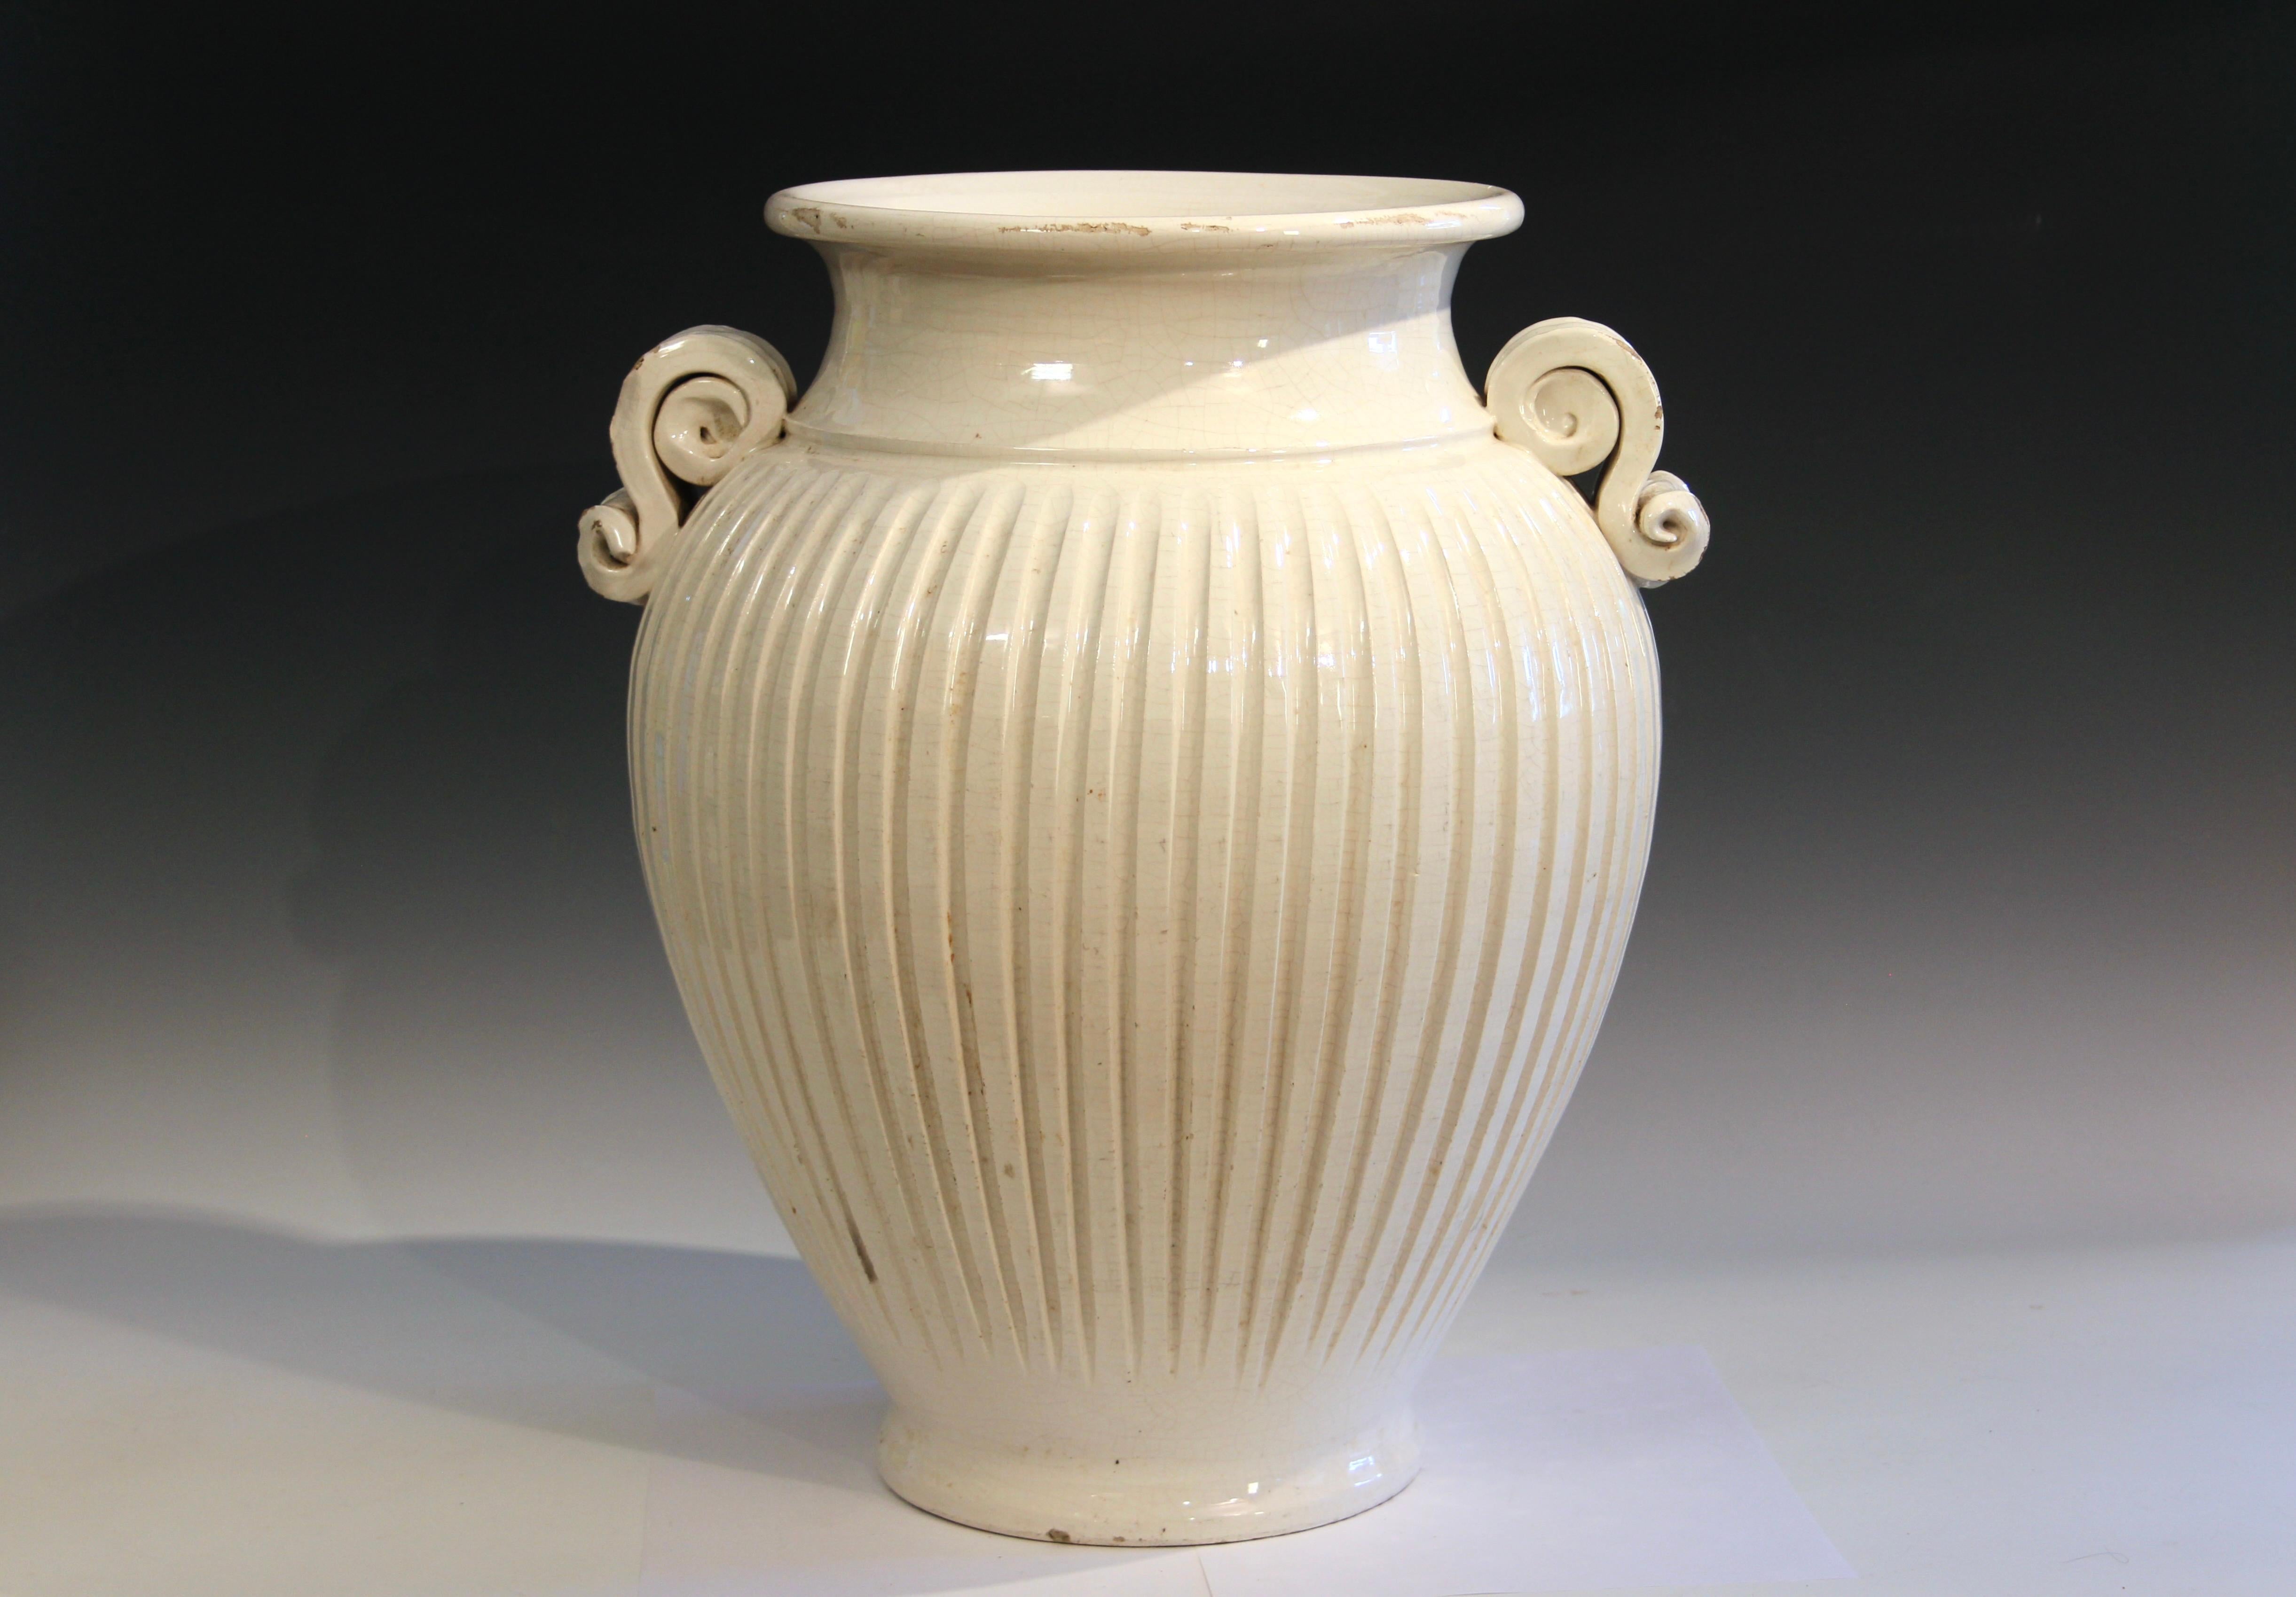 Large vintage hand turned Italian pottery vase with fluted sides and S-form handles. Classical Italian urn form. Great looking piece. Circa late 20th century. 18